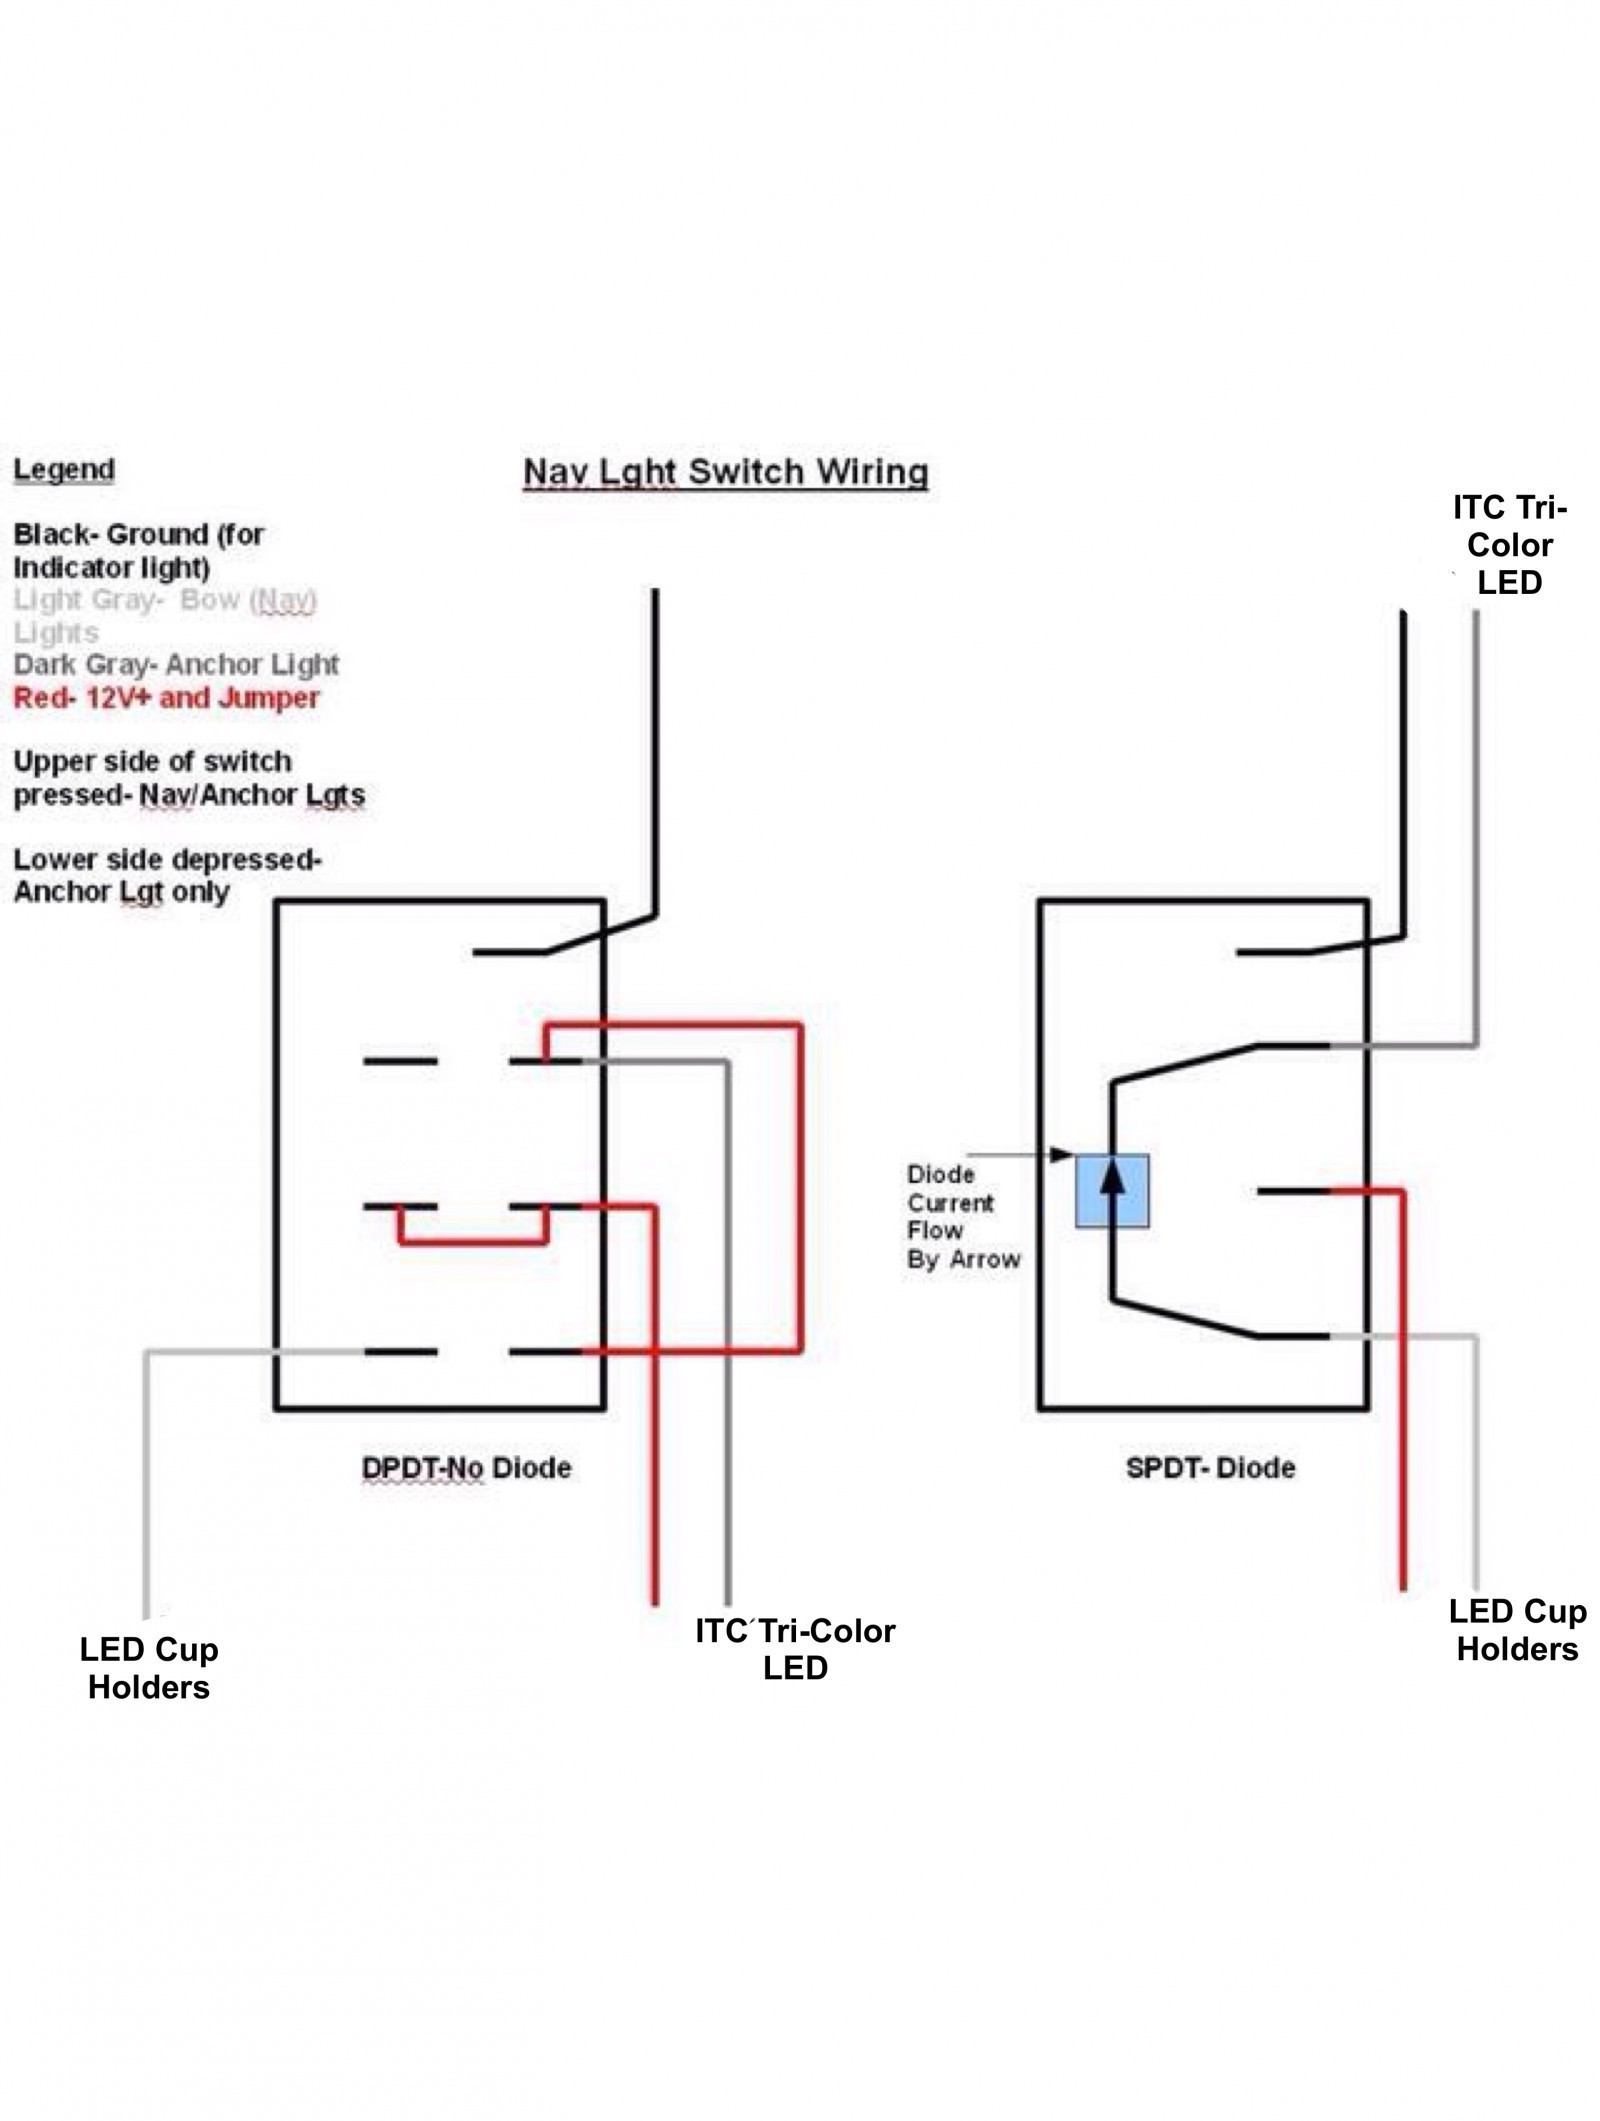 Wiring Diagram For Single Pole Switch With Pilot Light Inspirationa Wiring Diagram For Pilot Light Switch Fresh Leviton Single Pole